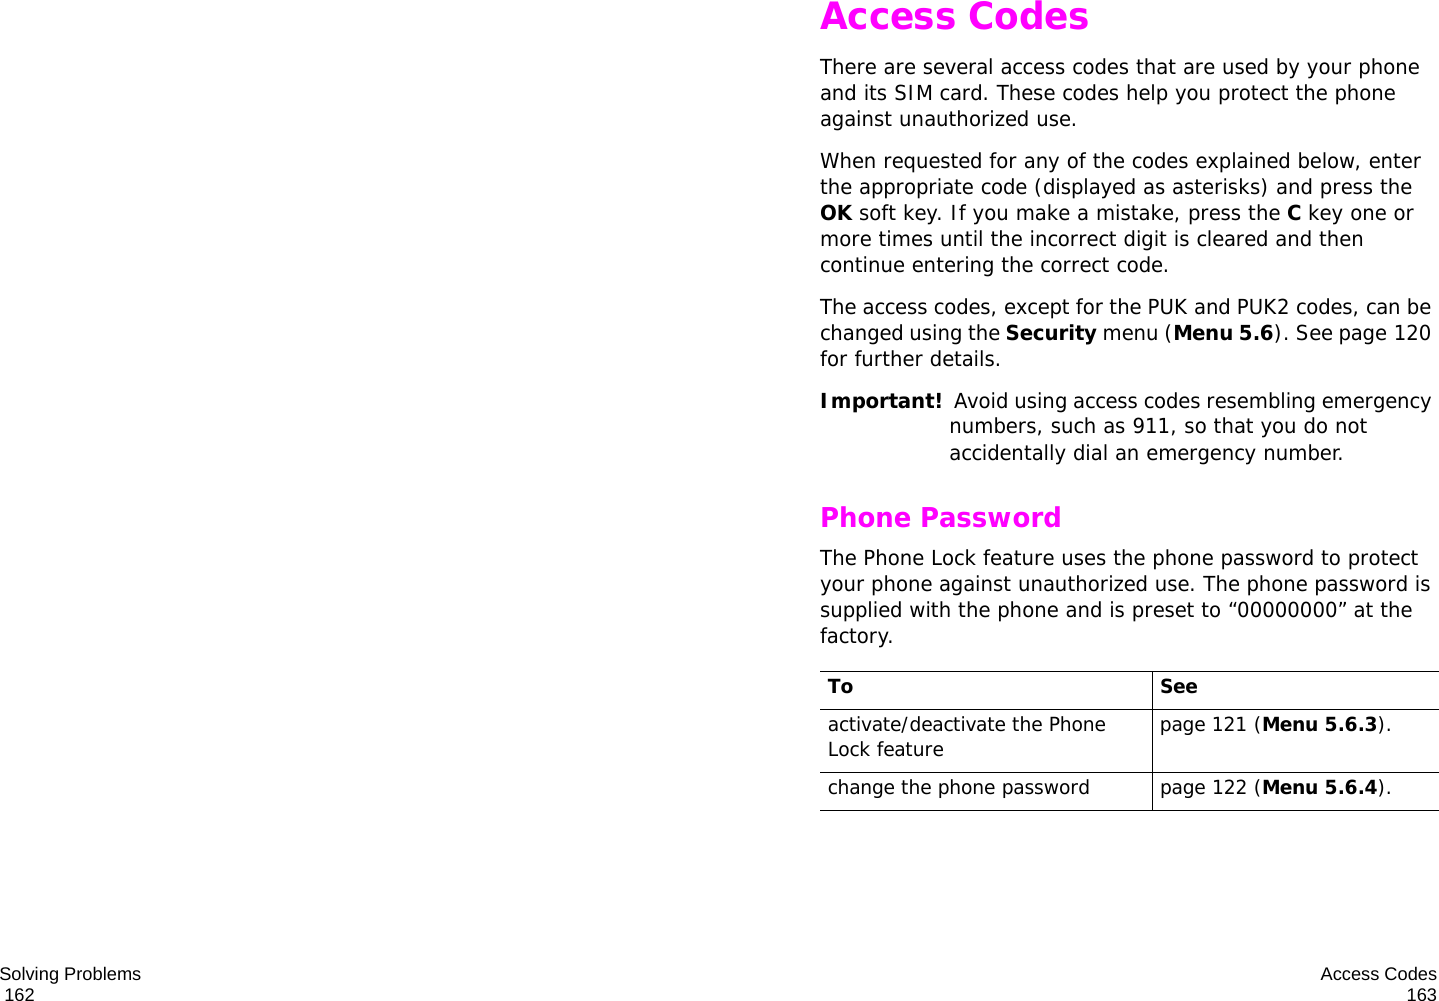 Solving Problems                                                                                       162 Access Codes163Access CodesThere are several access codes that are used by your phone and its SIM card. These codes help you protect the phone against unauthorized use.When requested for any of the codes explained below, enter the appropriate code (displayed as asterisks) and press the OK soft key. If you make a mistake, press the C key one or more times until the incorrect digit is cleared and then continue entering the correct code.The access codes, except for the PUK and PUK2 codes, can be changed using the Security menu (Menu 5.6). See page 120 for further details.Important!  Avoid using access codes resembling emergency numbers, such as 911, so that you do not accidentally dial an emergency number.Phone PasswordThe Phone Lock feature uses the phone password to protect your phone against unauthorized use. The phone password is supplied with the phone and is preset to “00000000” at the factory.To Seeactivate/deactivate the Phone Lock feature page 121 (Menu 5.6.3).change the phone password page 122 (Menu 5.6.4).